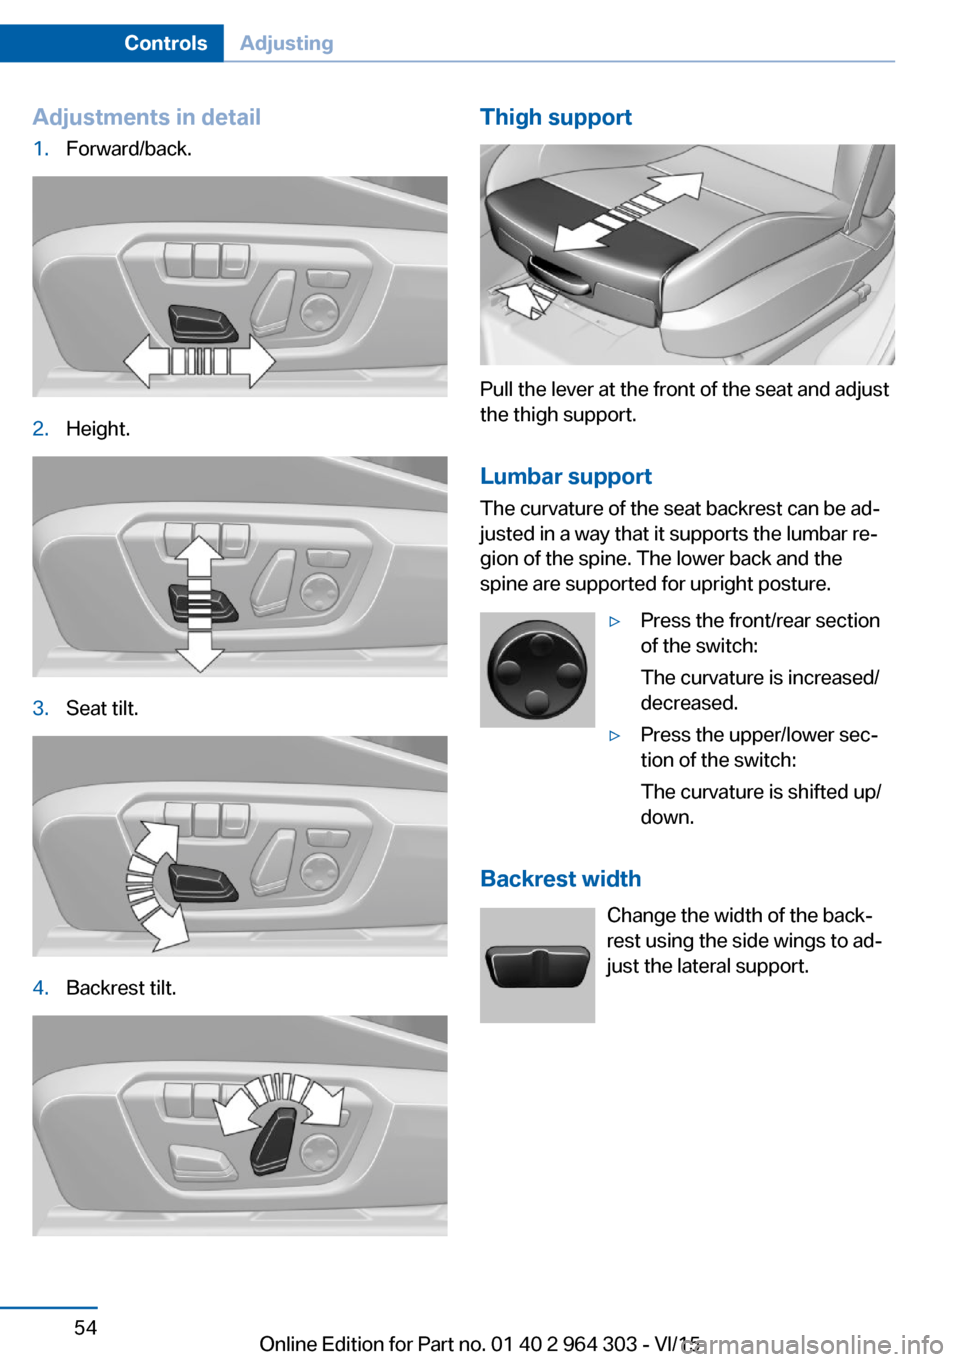 BMW X1 2016 F48 Owners Manual Adjustments in detail1.Forward/back.2.Height.3.Seat tilt.4.Backrest tilt.Thigh support
Pull the lever at the front of the seat and adjust
the thigh support.
Lumbar support The curvature of the seat ba